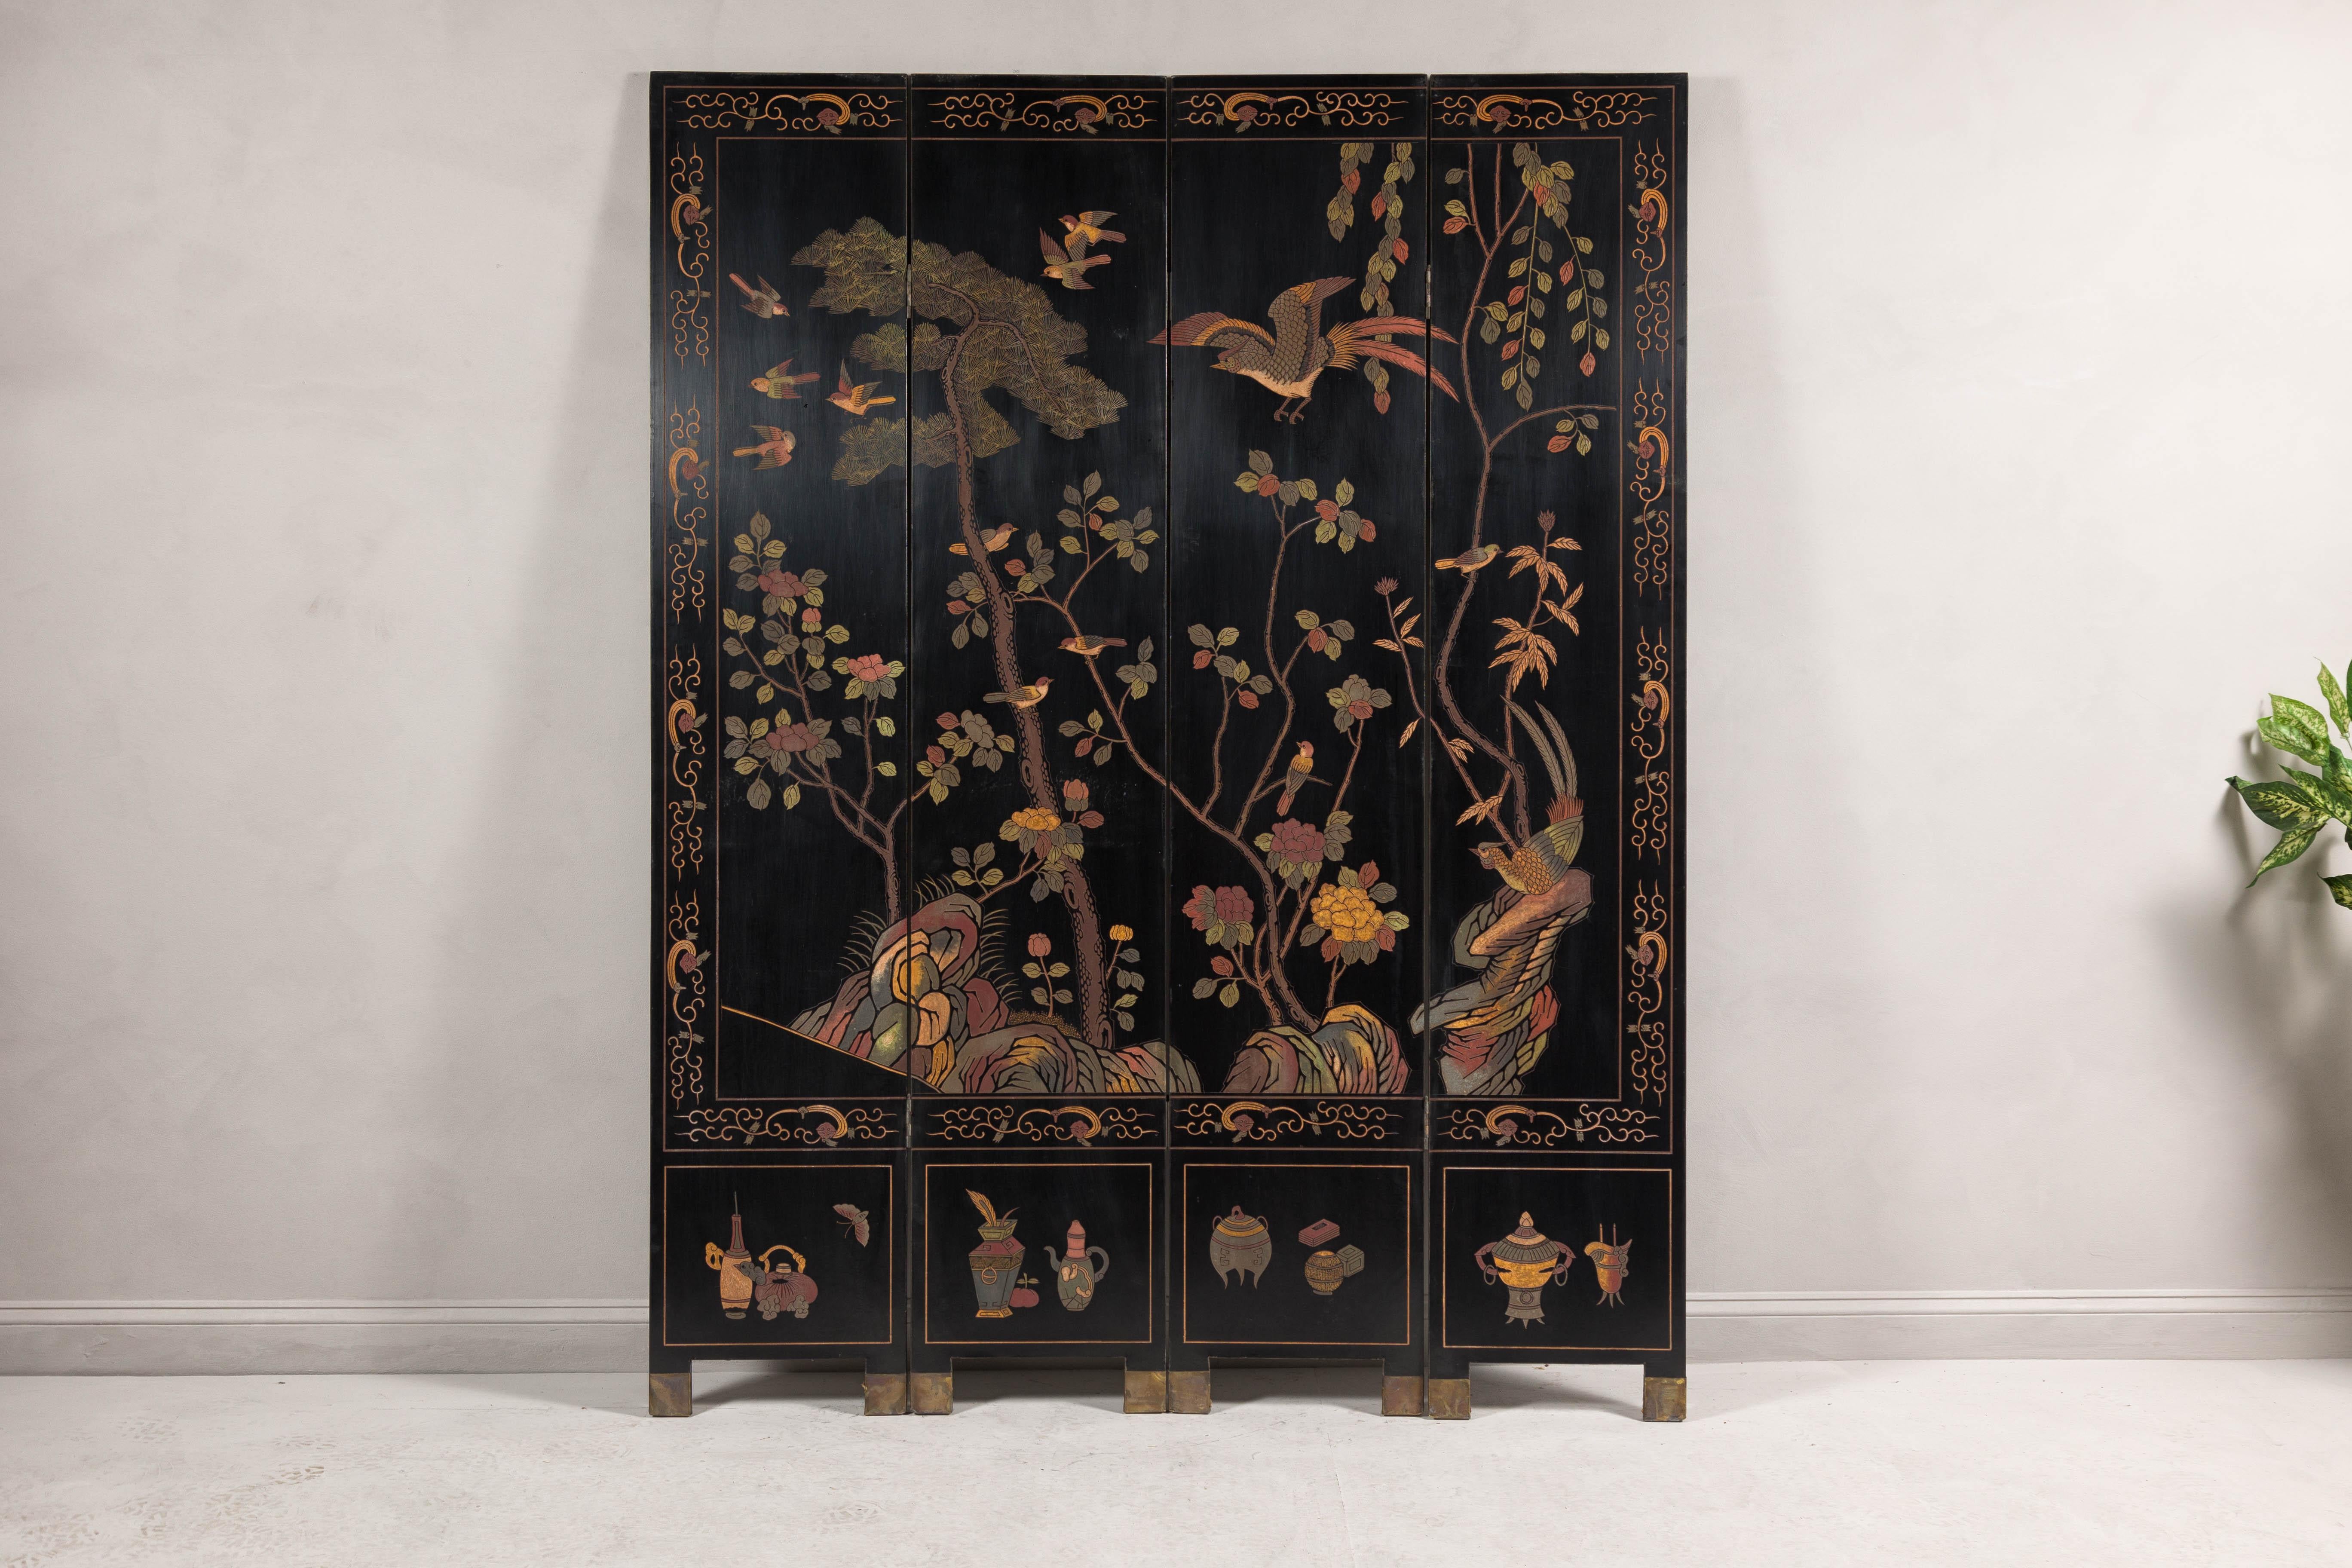 A vintage black lacquered four-panel screen with polychrome décor showcasing birds, trees, foliage and rocks. This vintage black lacquered four-panel screen, originating from China, presents an exquisite polychrome decoration of birds, trees,